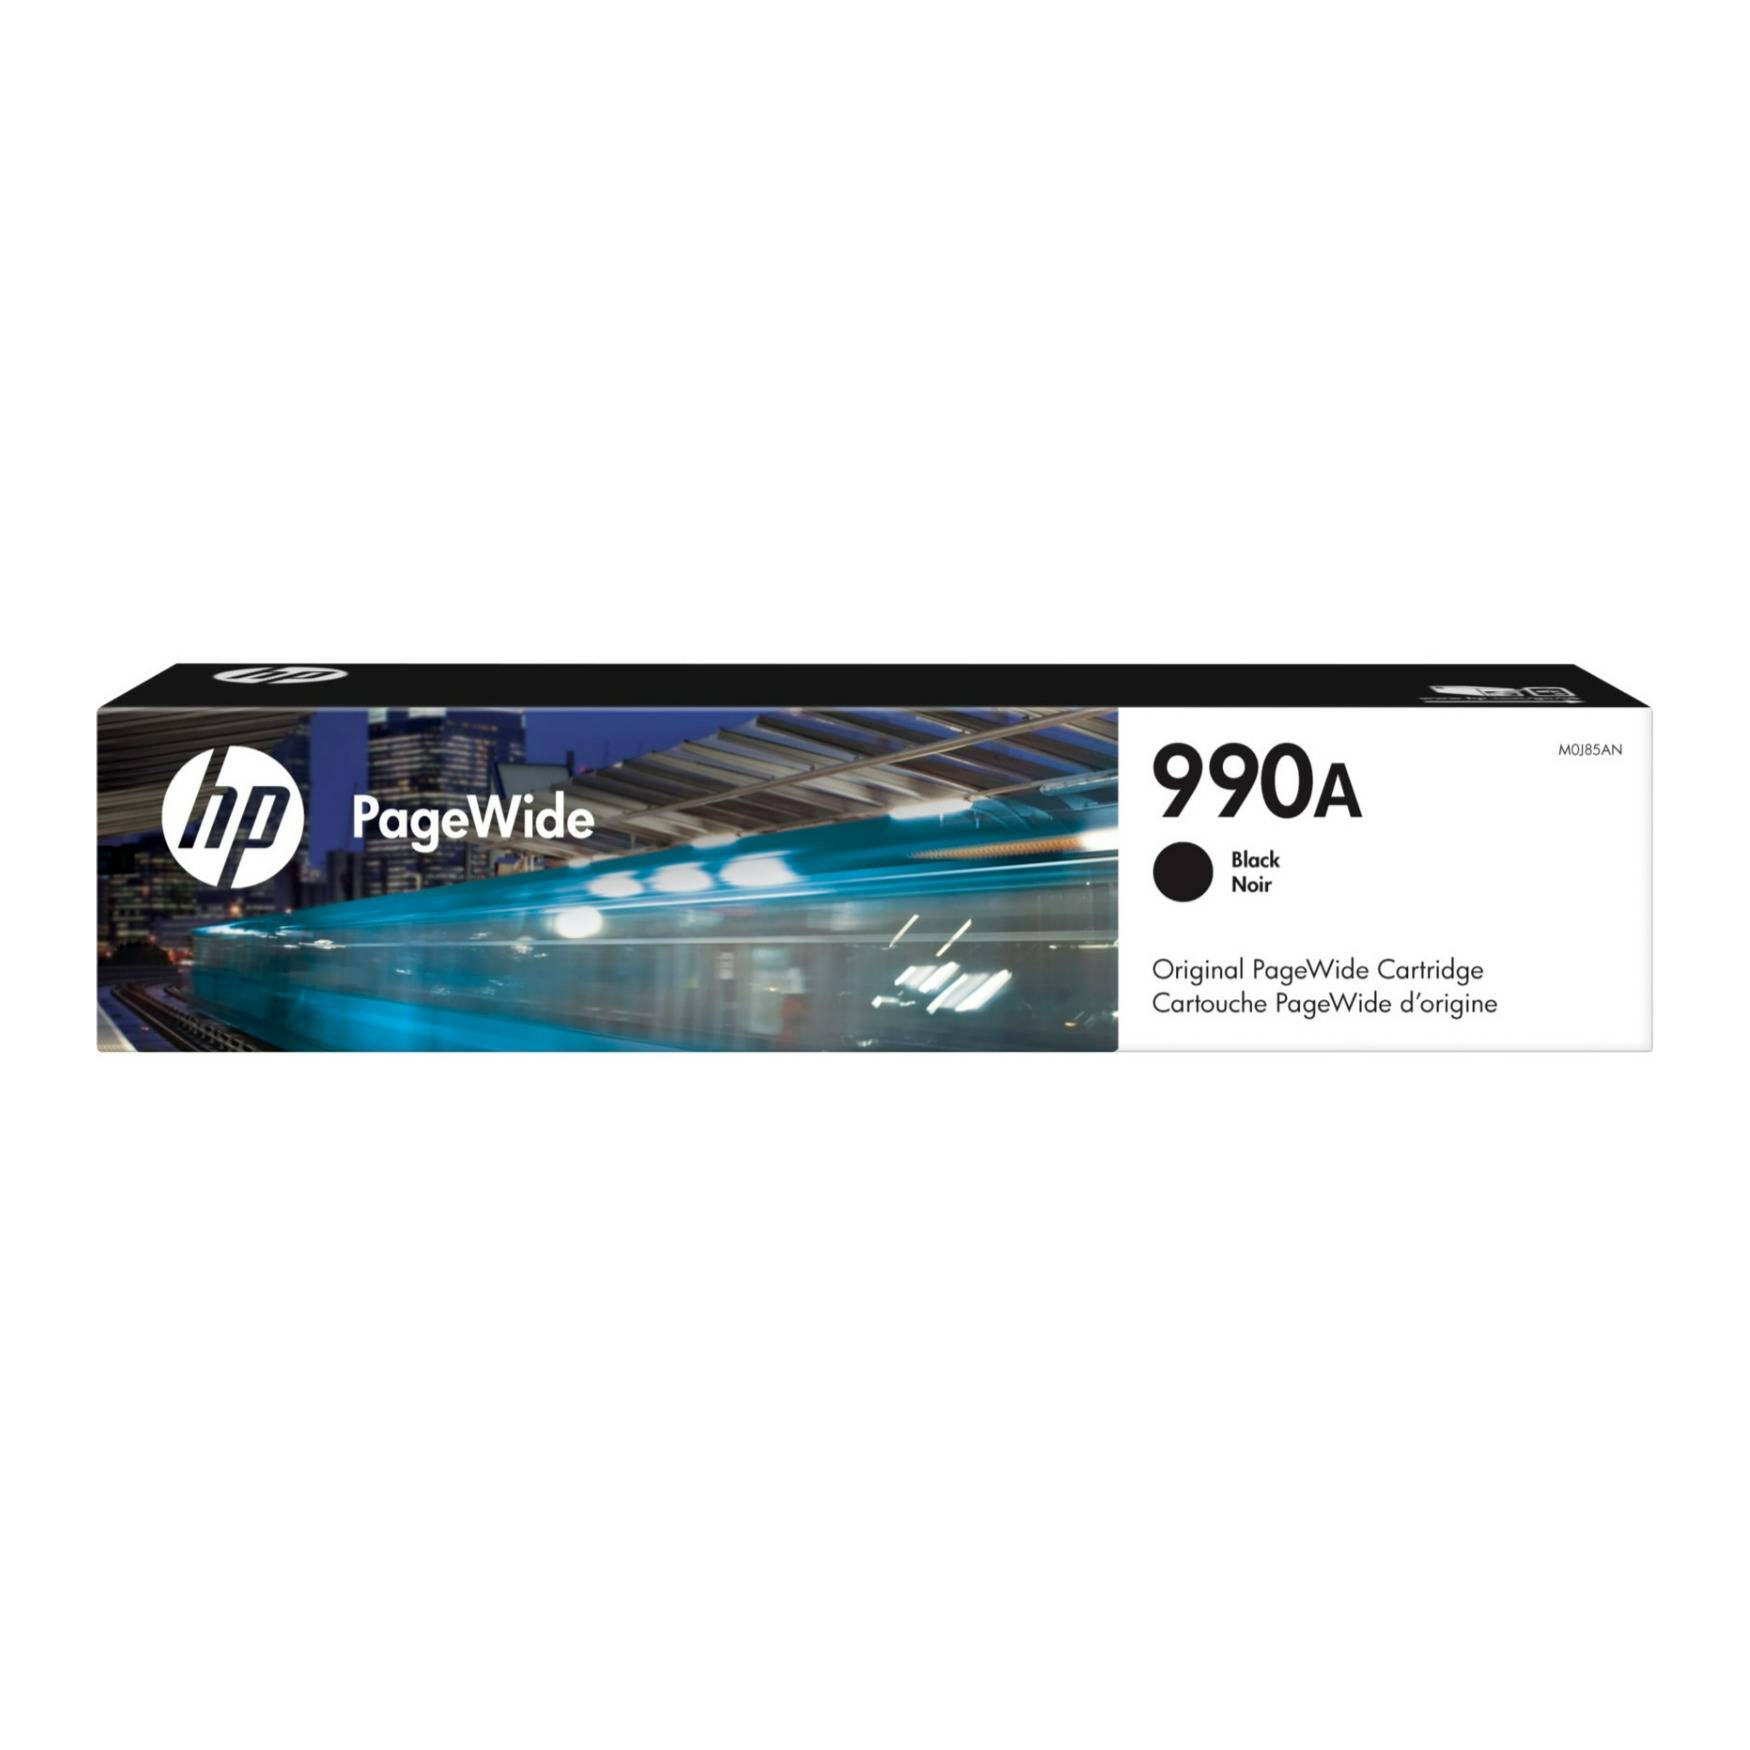 HP 990A Black Original PageWide Cartridge, Easy to Install (10,000 Pages Capacity)